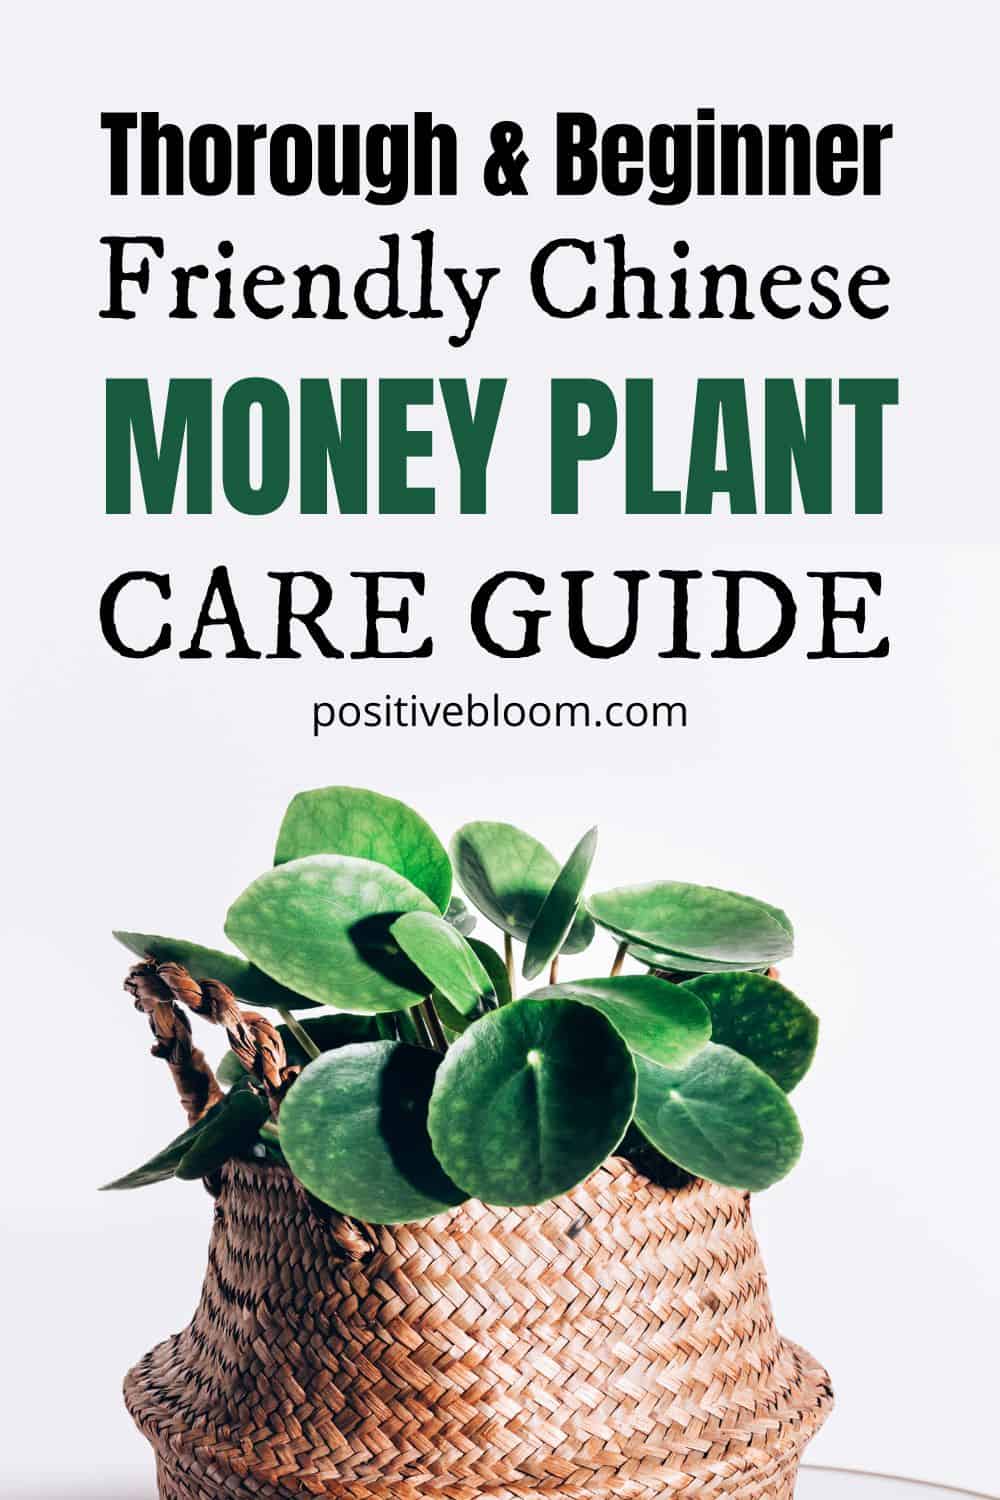 Thorough & Beginner-Friendly Chinese Money Plant Care Guide Pinterest